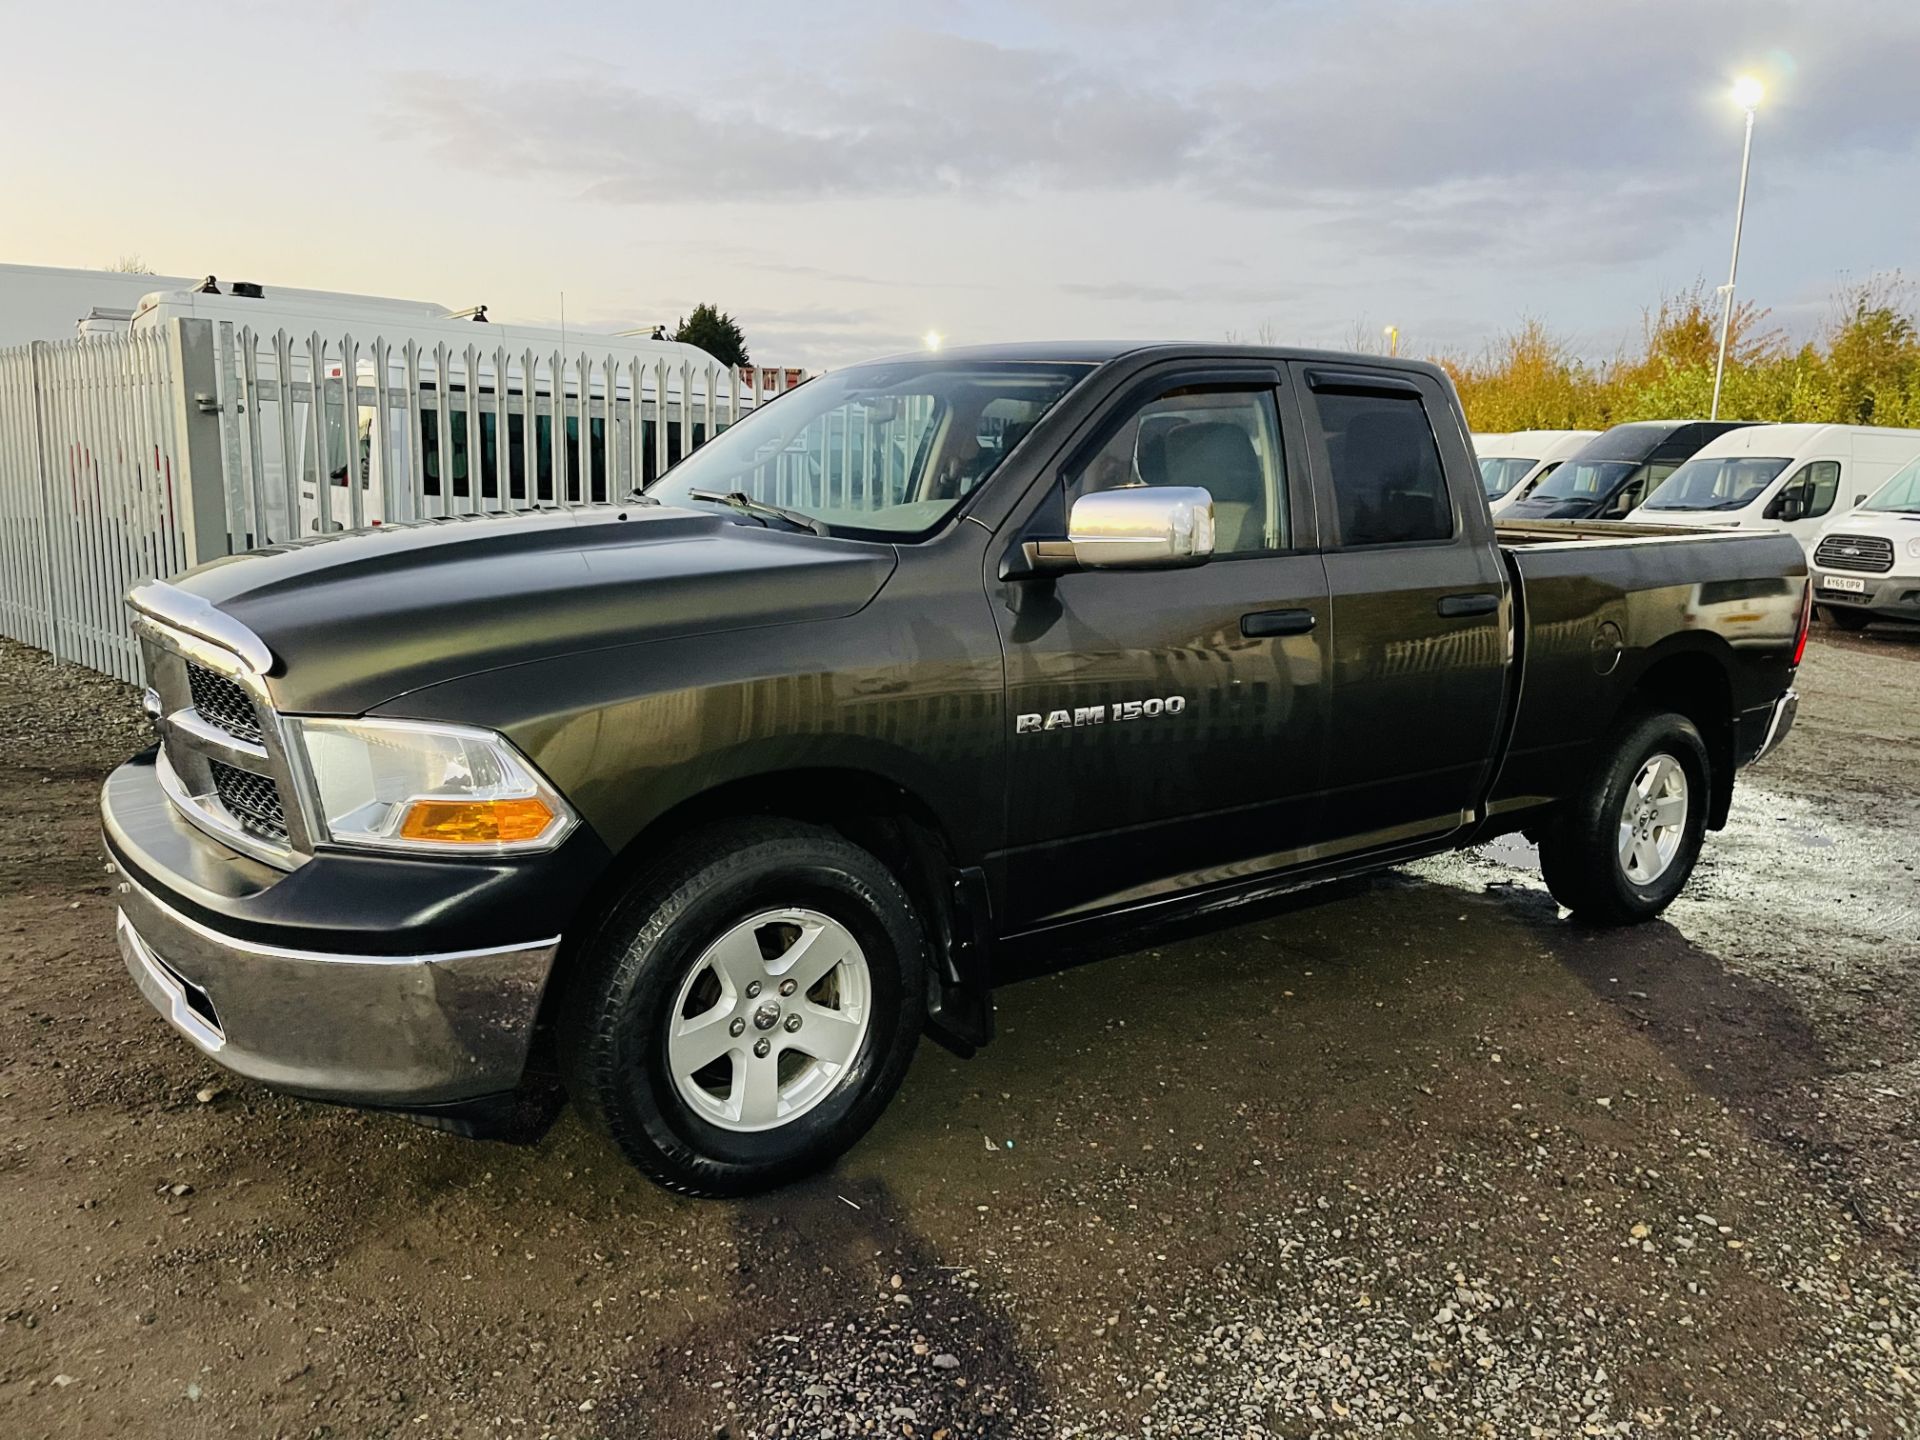 Dodge Ram 4.7 V8 1500 ST 4WD ' 2012 Year ' A/C - Cruise Control - 6 Seats - Image 3 of 27